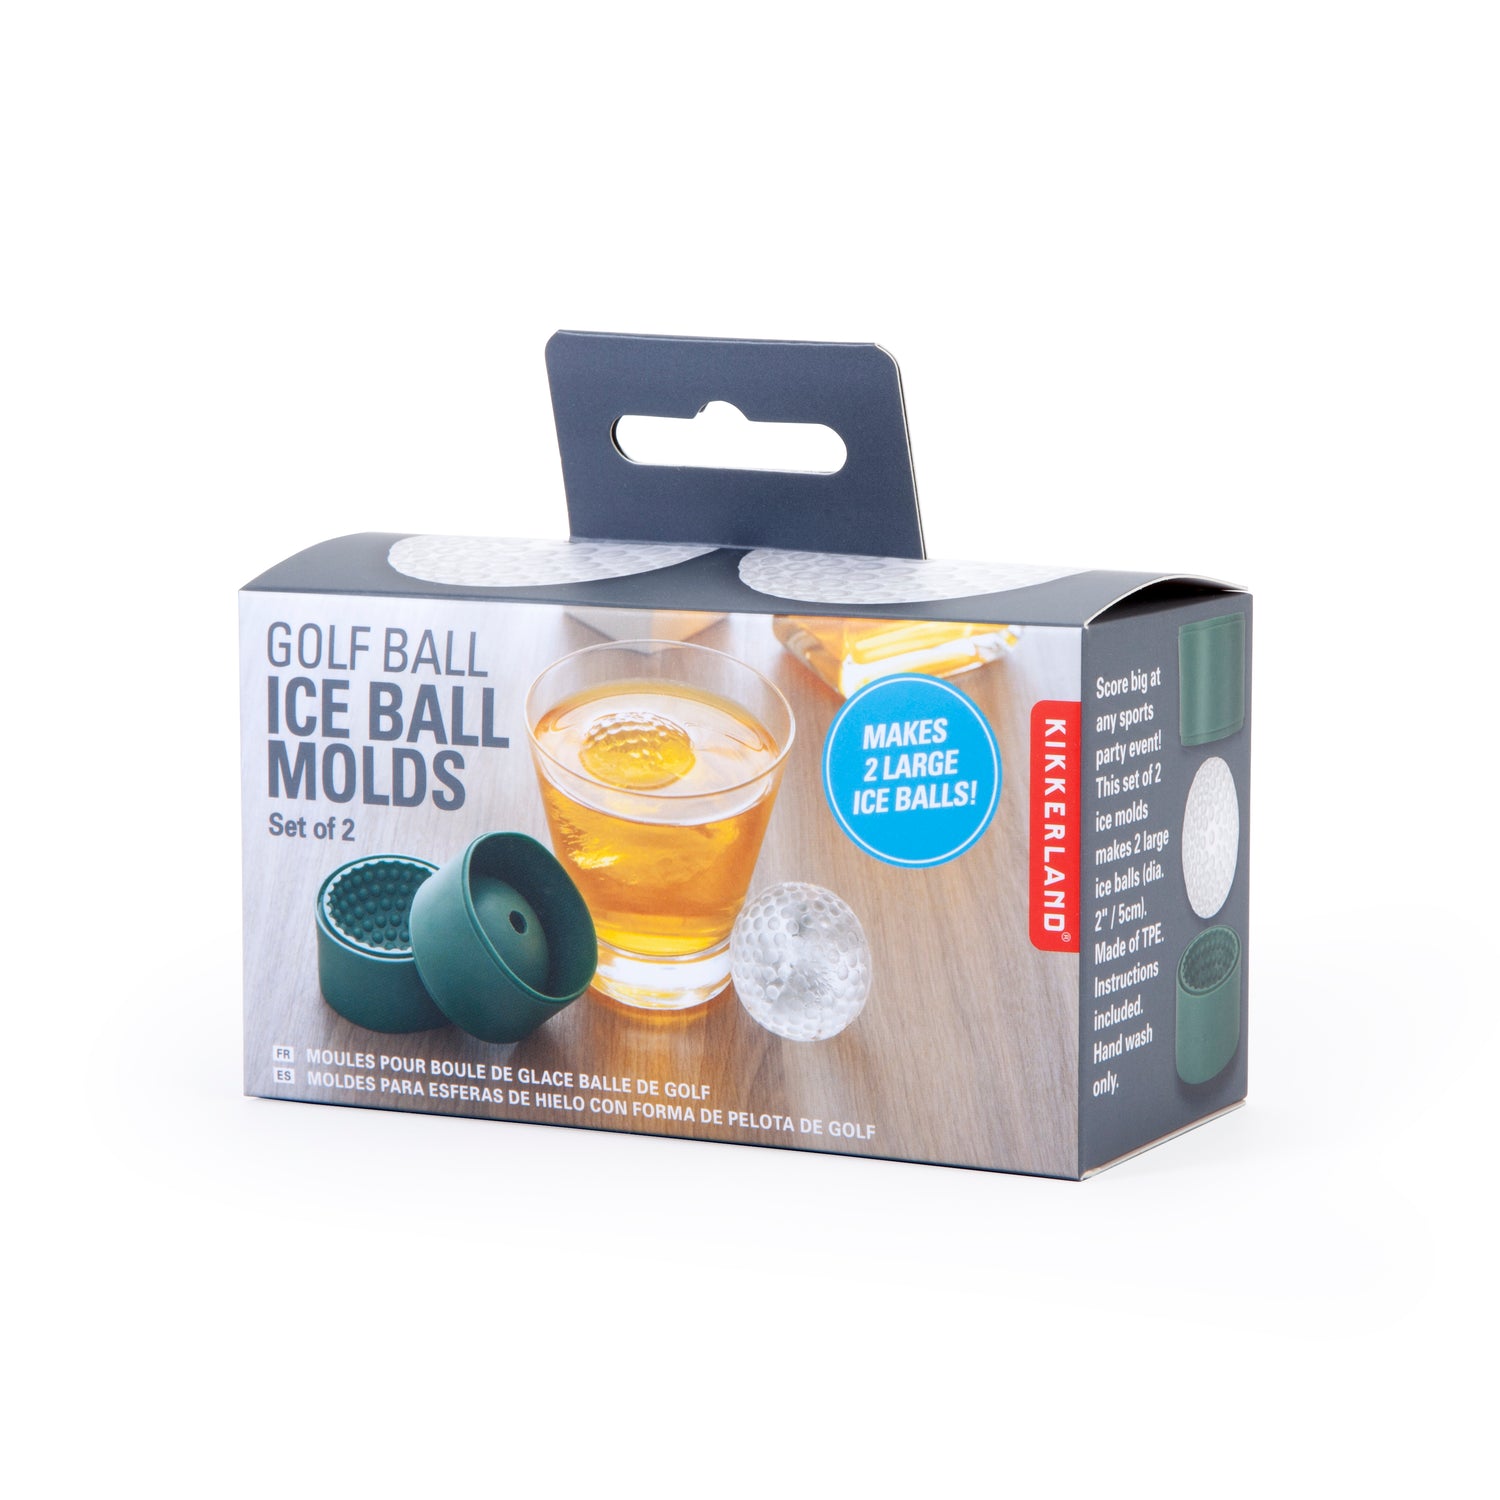 Sport Silicone Sphere Ice Mold